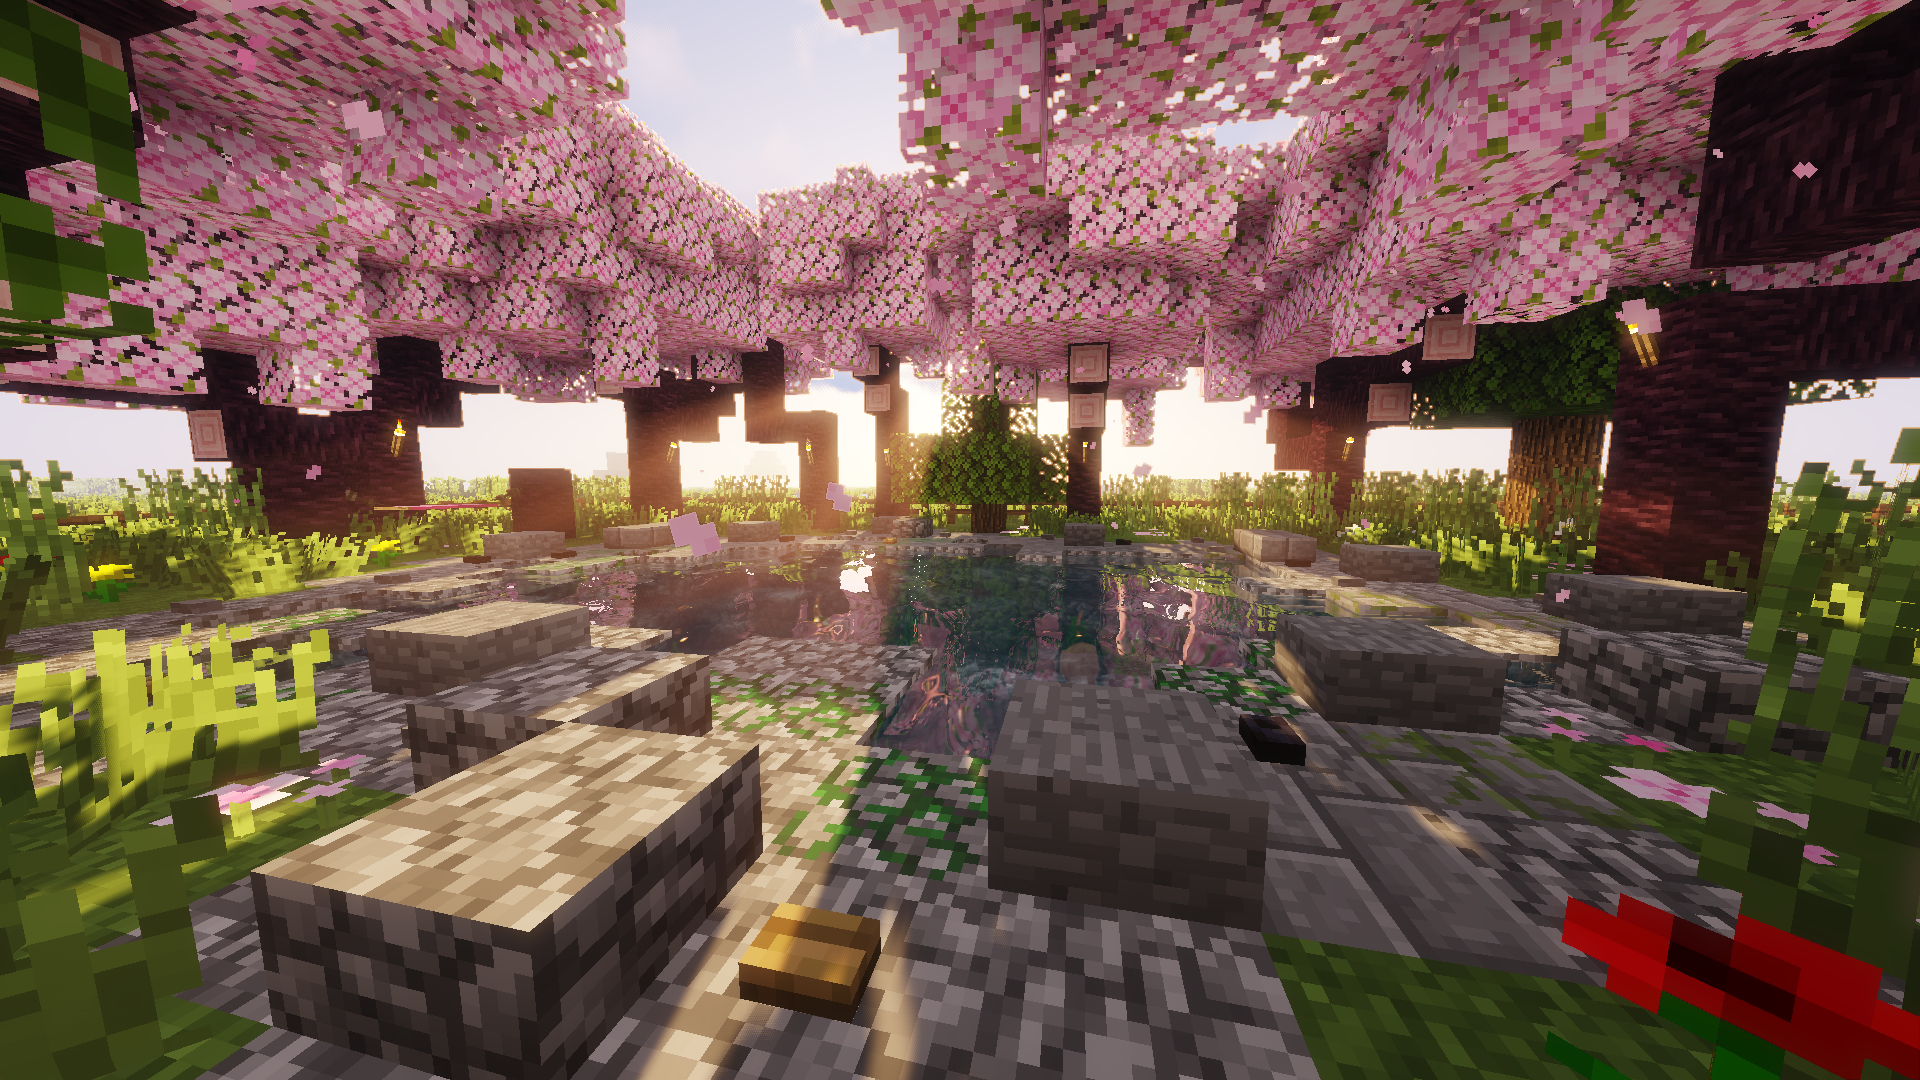 Minecraft Shaders Cherry Blossom Relaxing Daylight Calm Chill Out 1920x1080